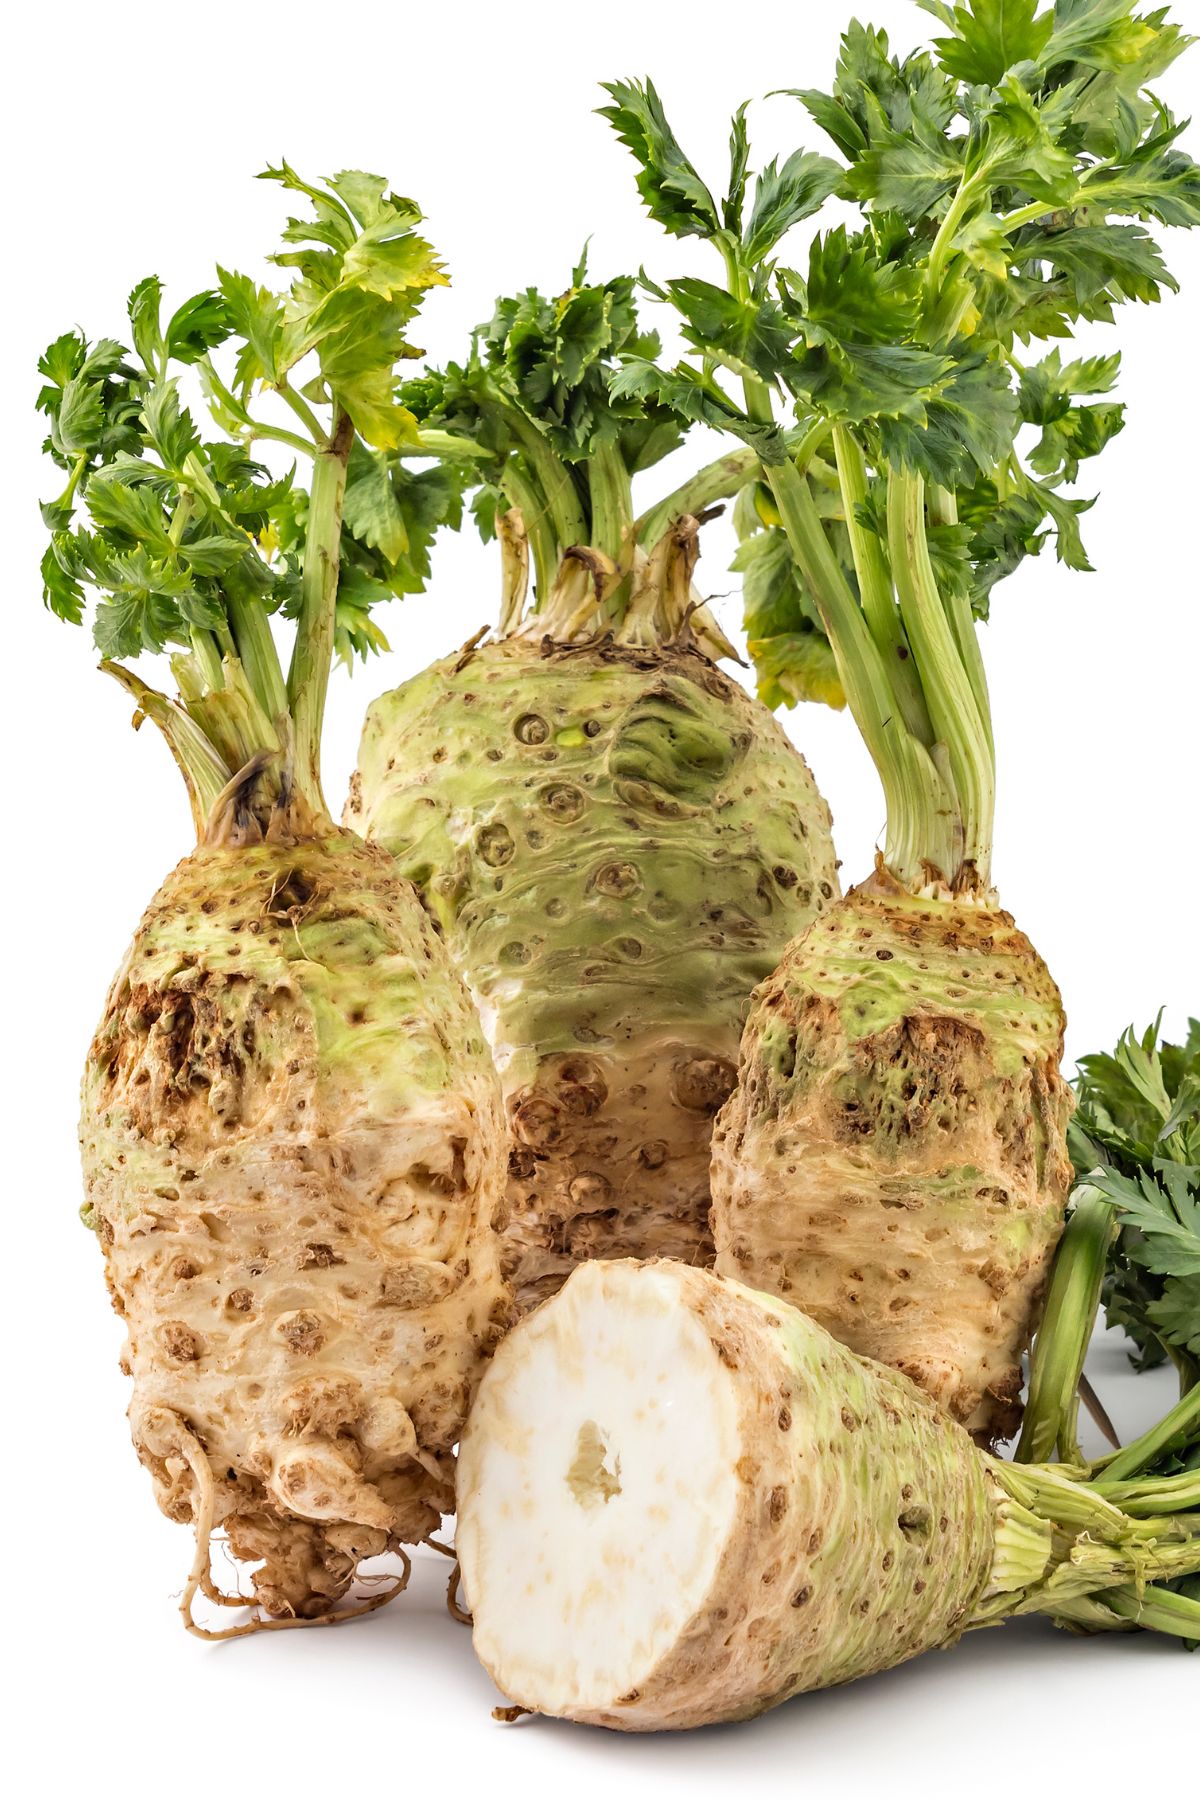 Celery roots with a celeriac sliced in half.